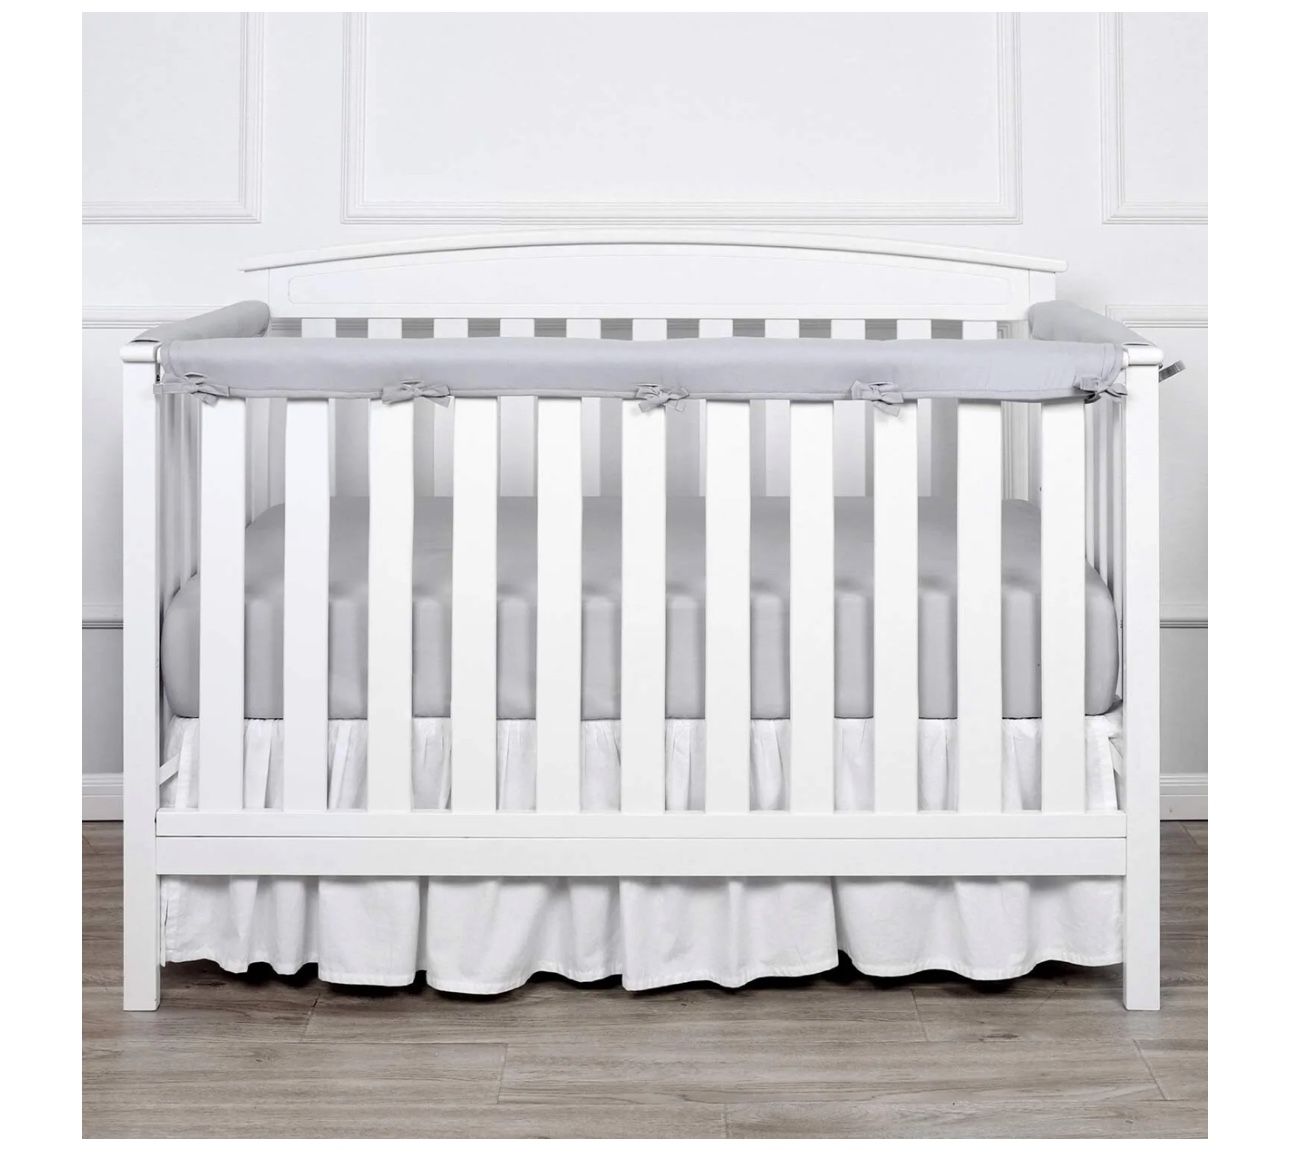 3 Pcs Padded Baby Crib Rail Cover Protector Set from Chewing, Safe Teething Gray